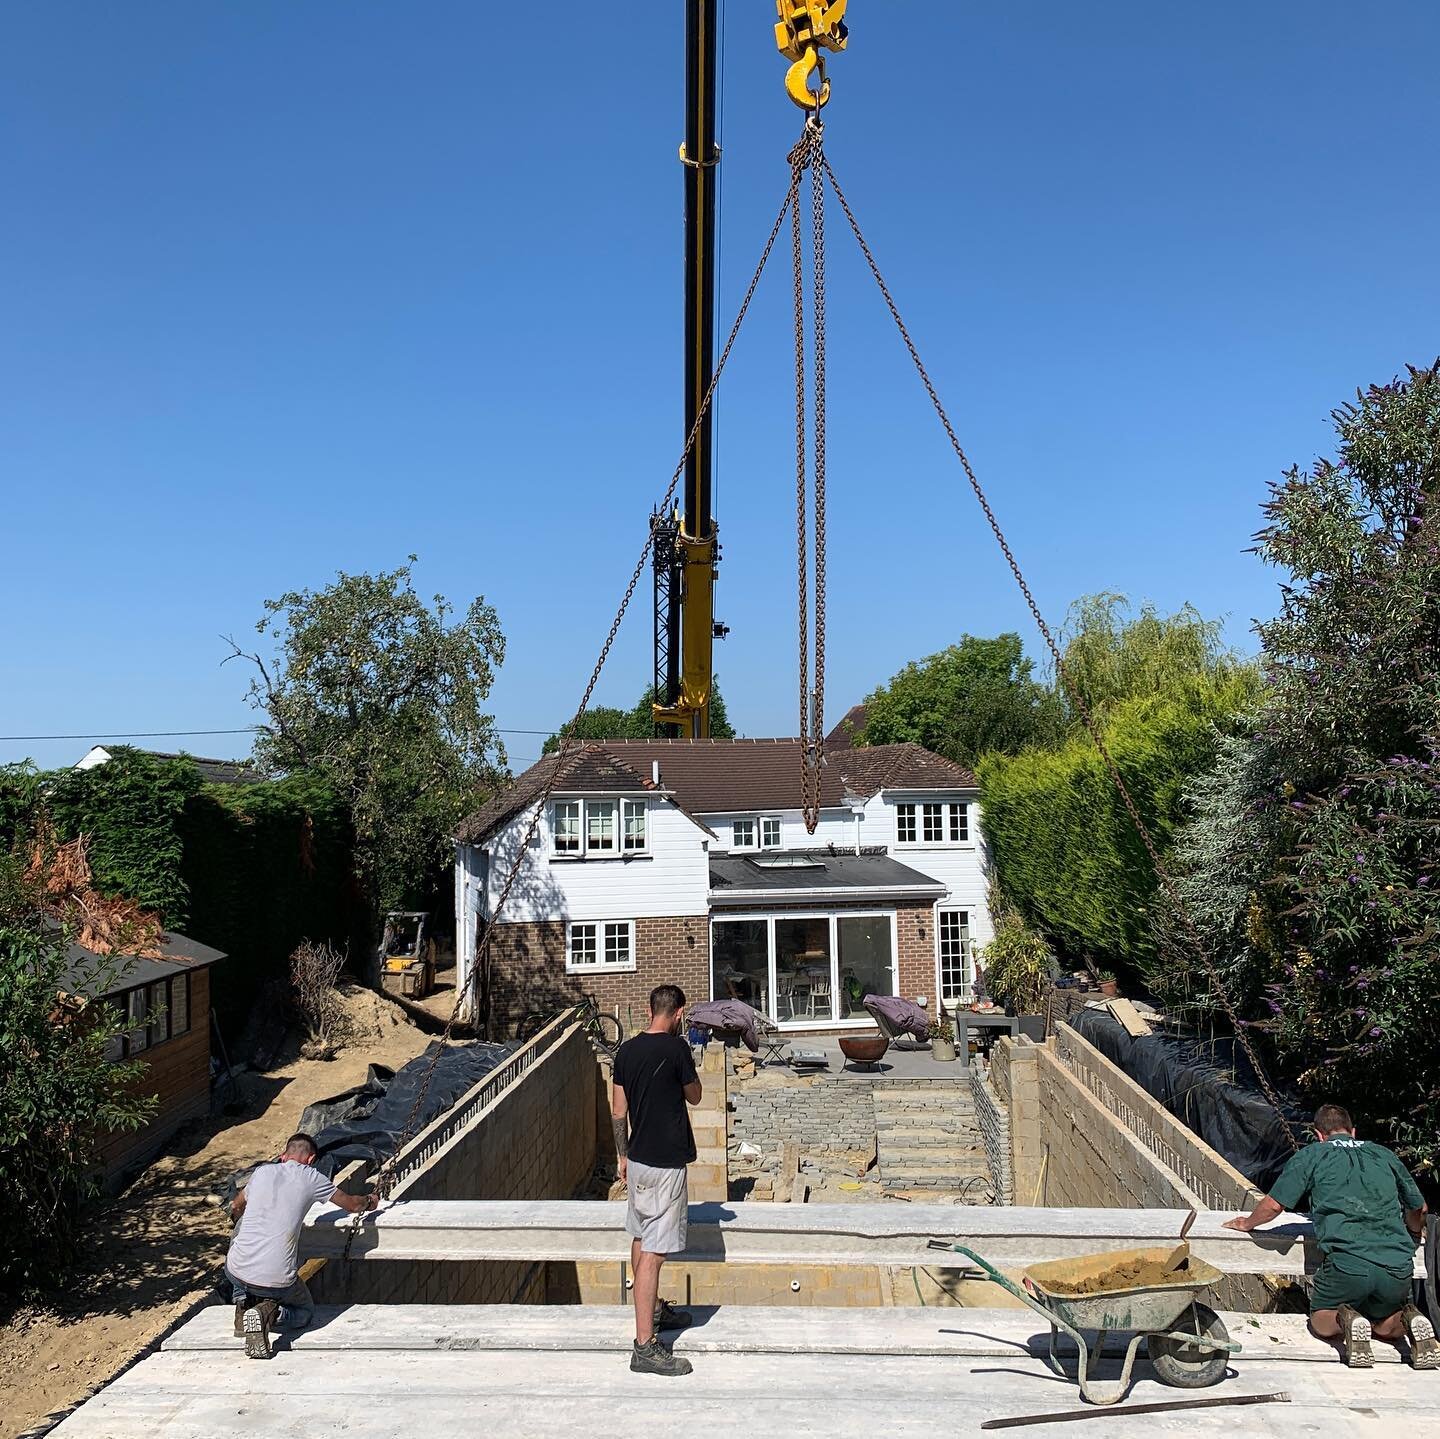 #swimming #pool #roof going on.
#bespoke #garden and #swimmingpooldesign #concrete #indoorswimmingpool  in #uckfield #eastsussex looking forward to the next stage putting the lawn over the roof. www.pnlandscapes.co.uk